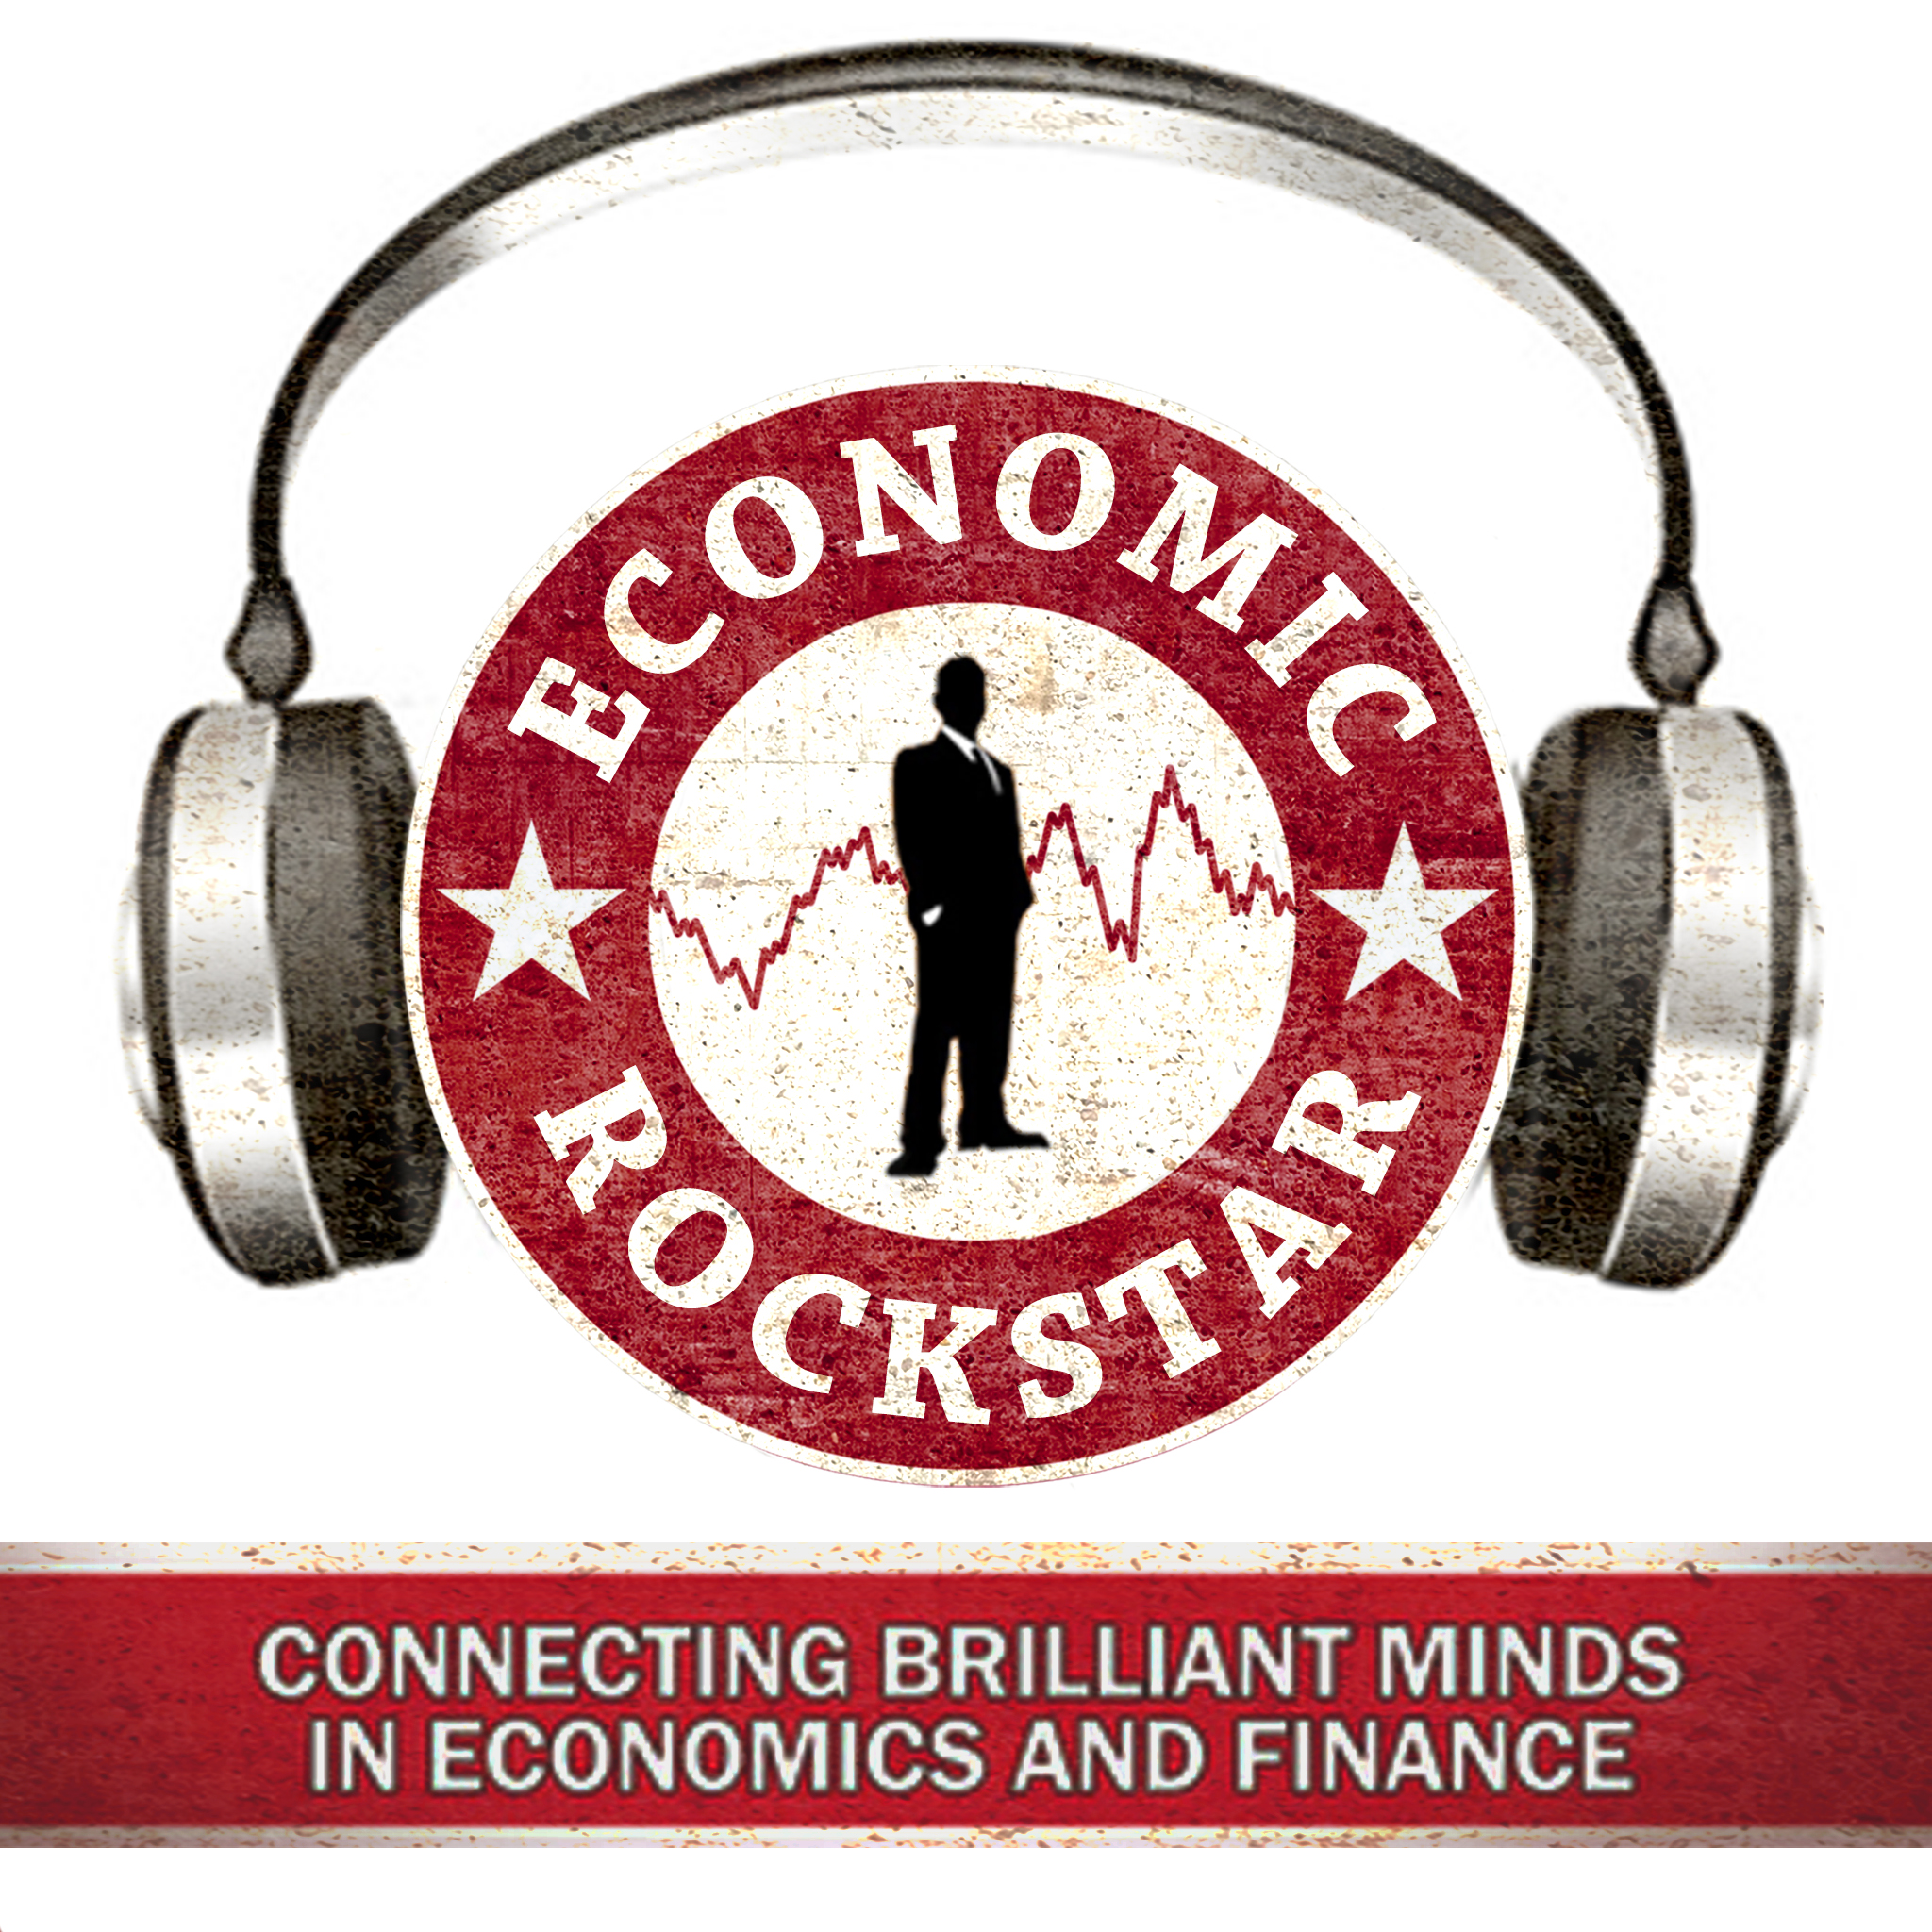 066: Best of 2015 Part 2: A Look Back at the Economic Rockstar Podcast